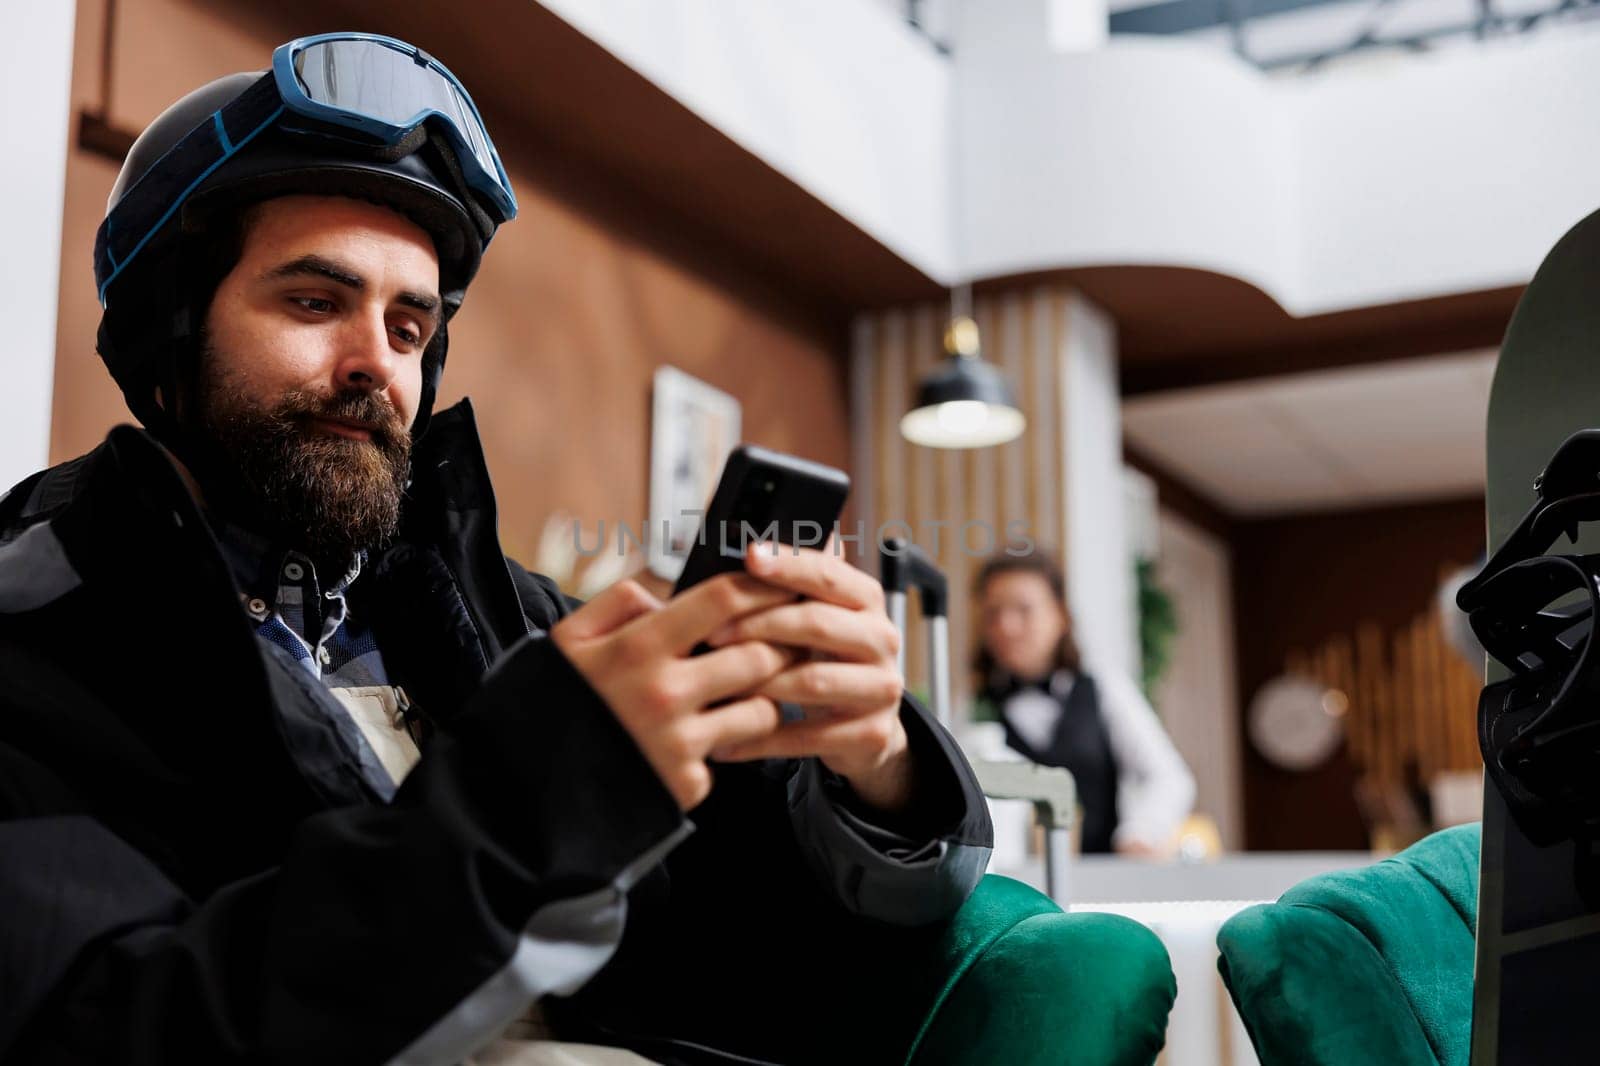 During winter holiday young man uses mobile phone in cozy lounge area. Male guest sitting on sofa with digital smart device and snowboard wearing winter jacket, ski goggles and helmet.